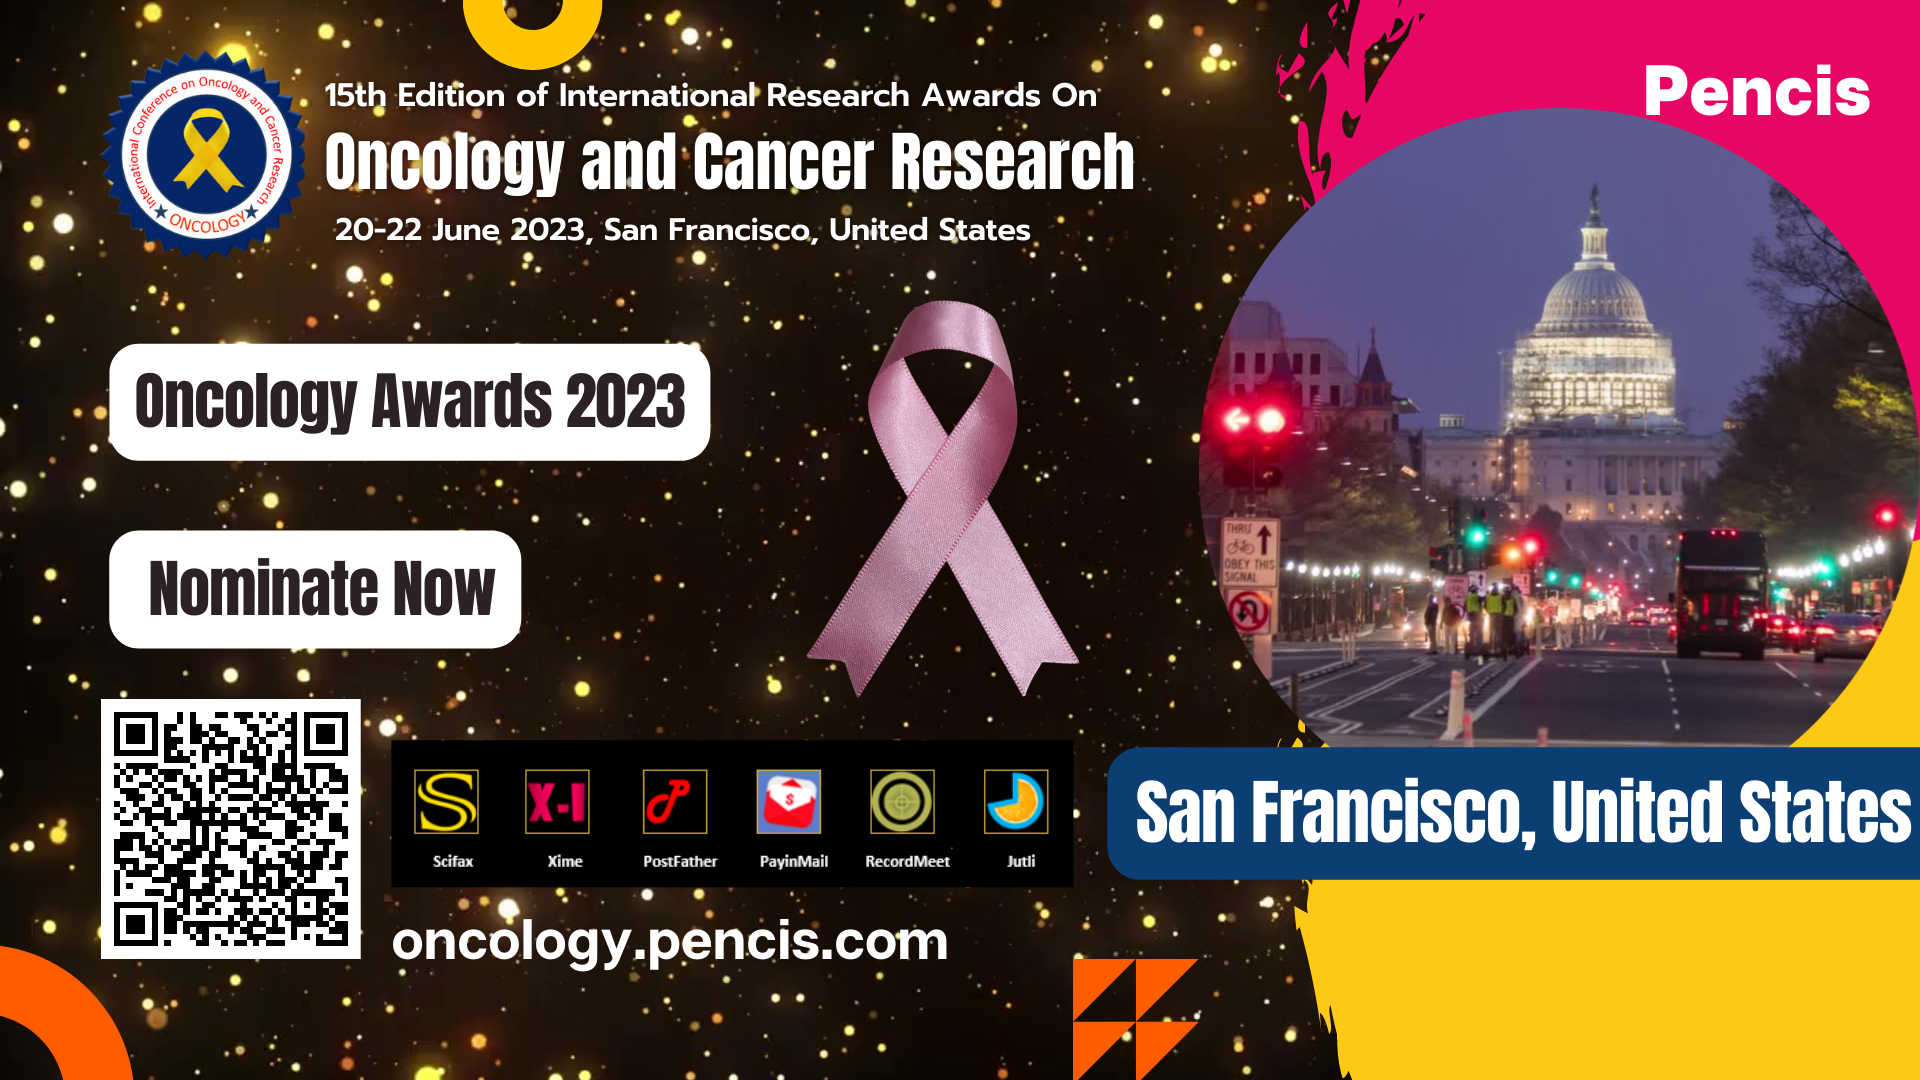 International Conference on Oncology and Cancer Research, San Francisco, United States, United States